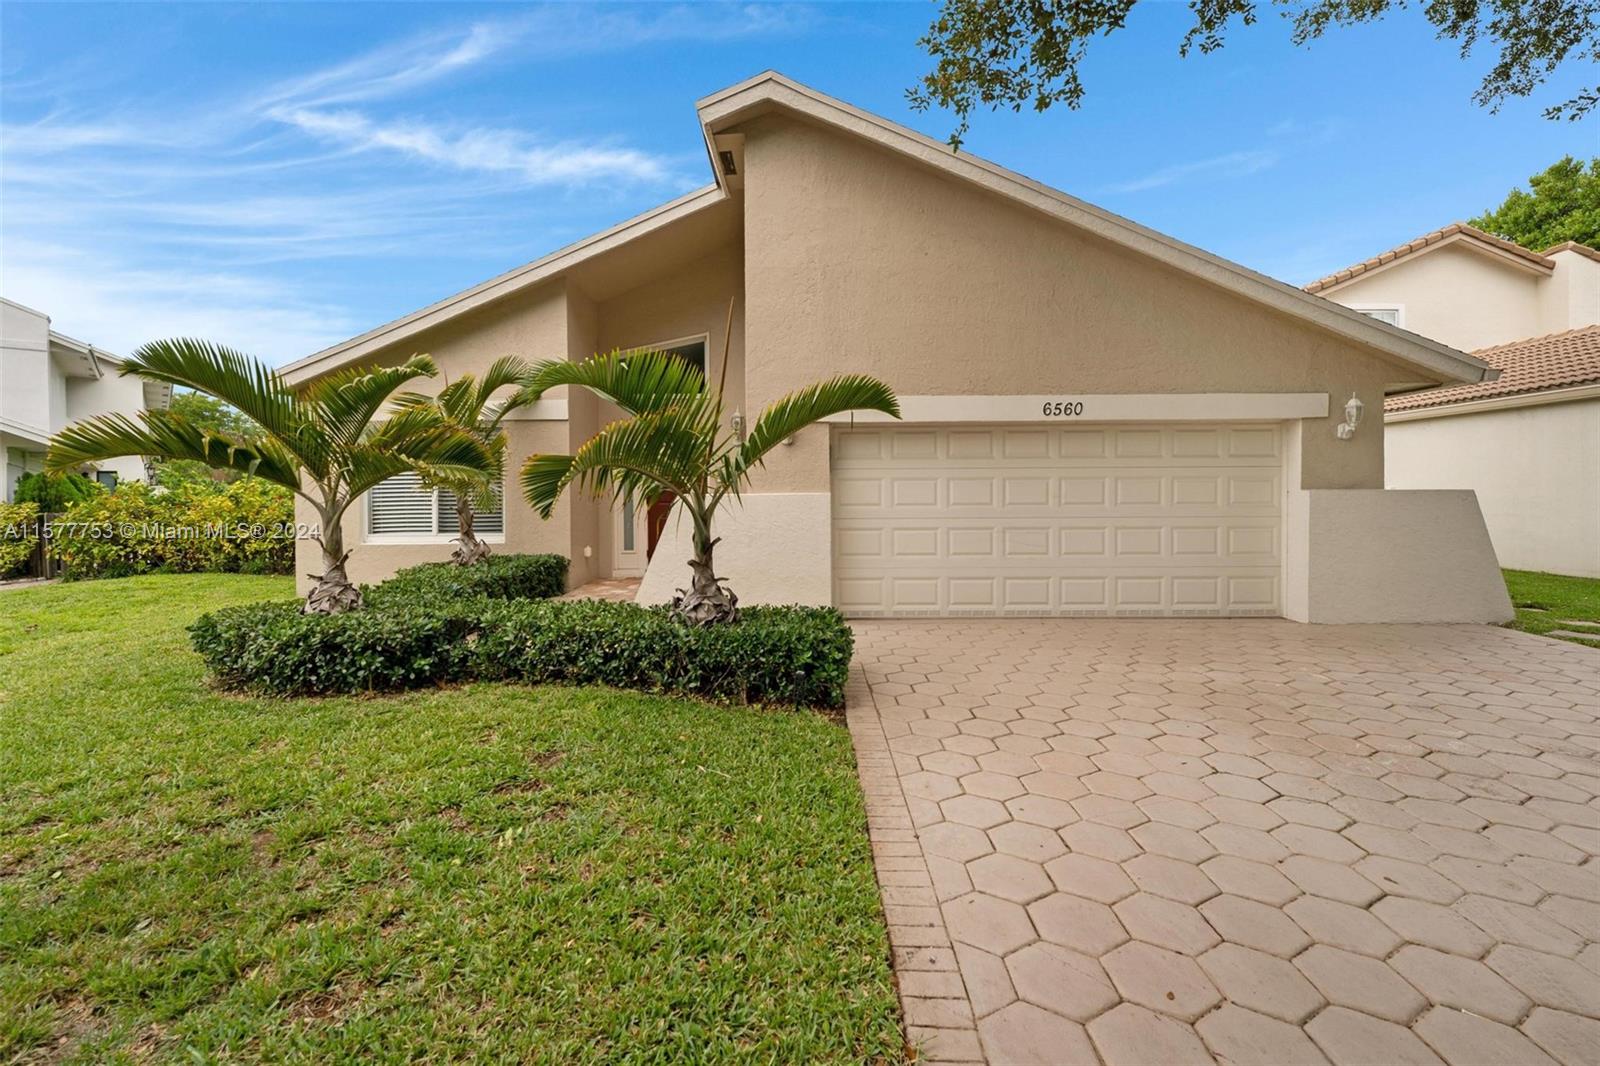 6560 Sw 13th St St, Plantation, Miami-Dade County, Florida - 4 Bedrooms  
3 Bathrooms - 